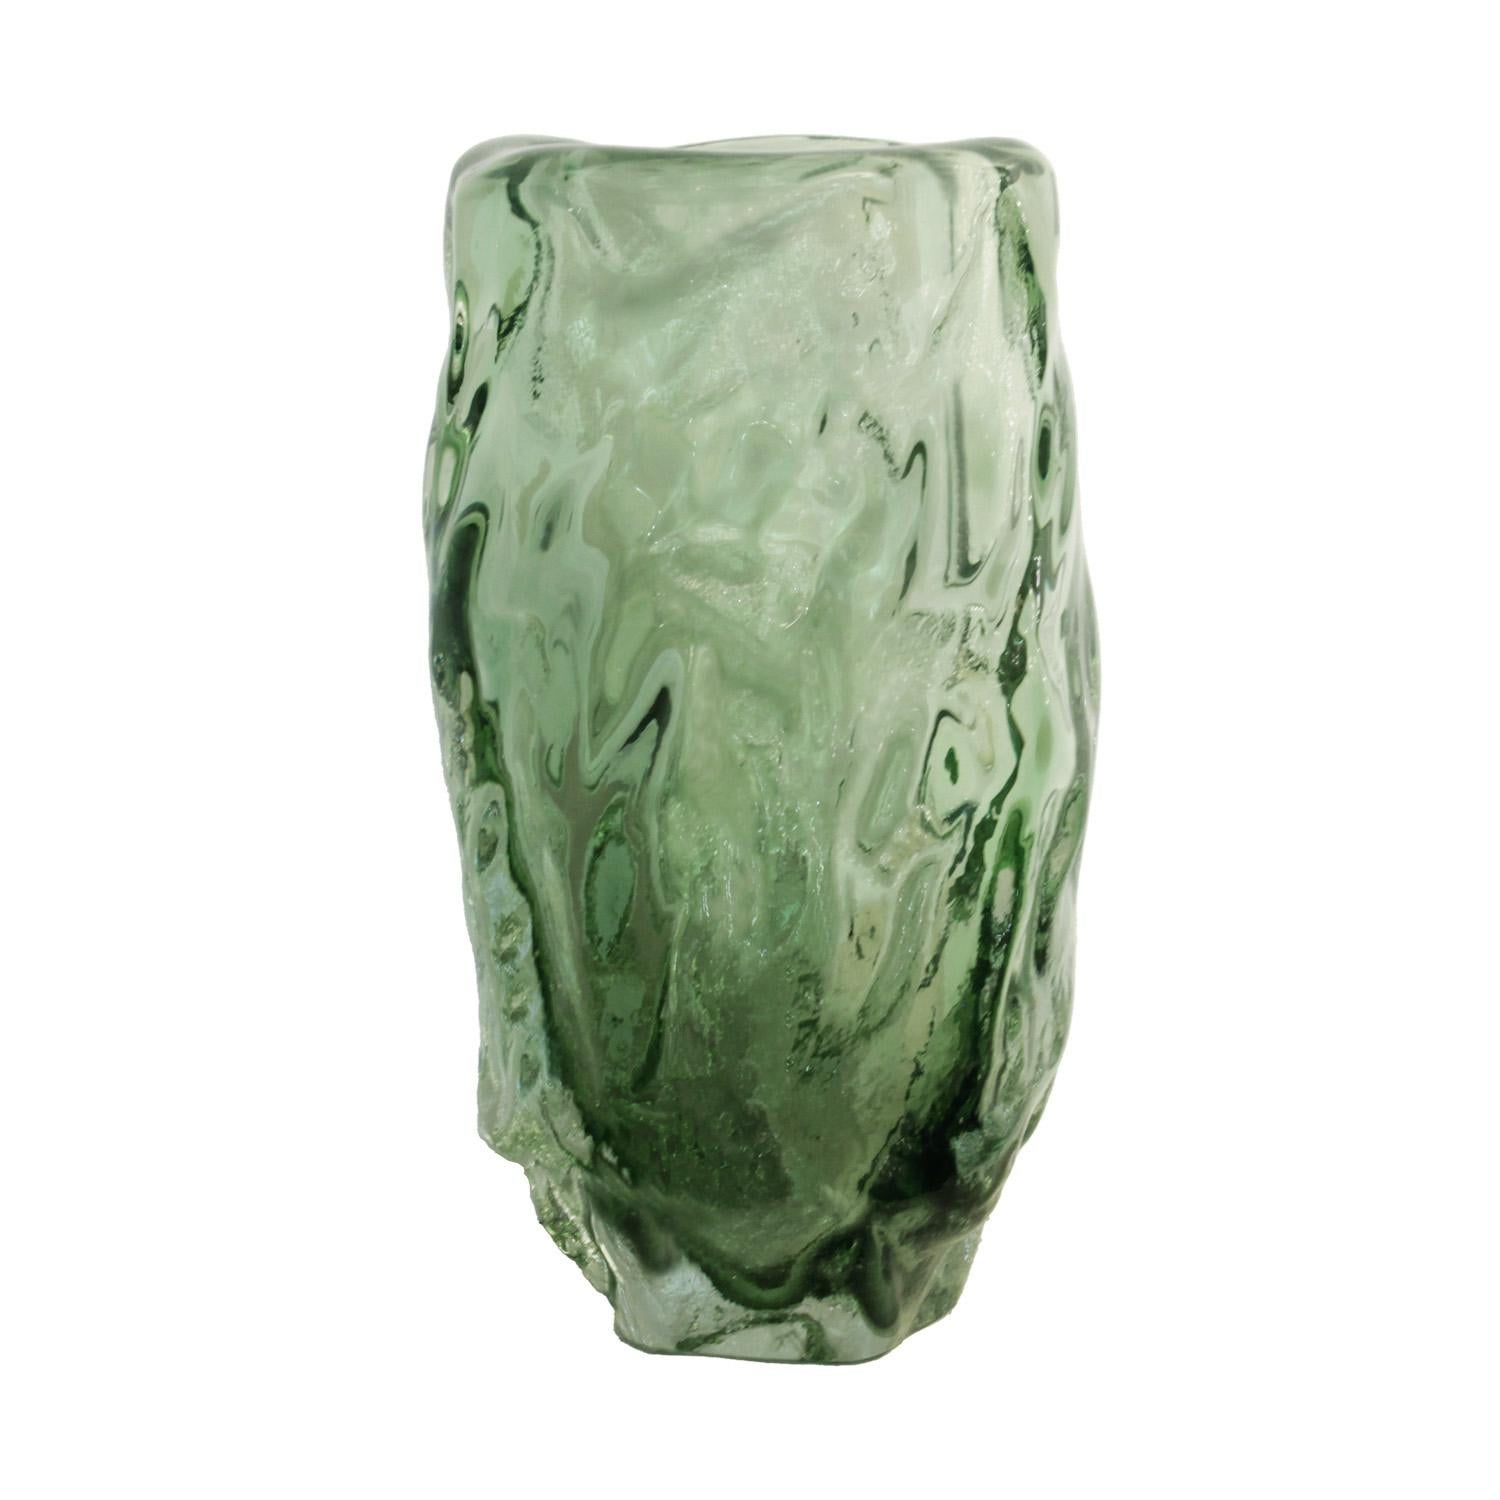 Hand crafted Murano sommerso green glass vase inspired by the works of Italian abstract artist Alberto Burri. Italy 2023